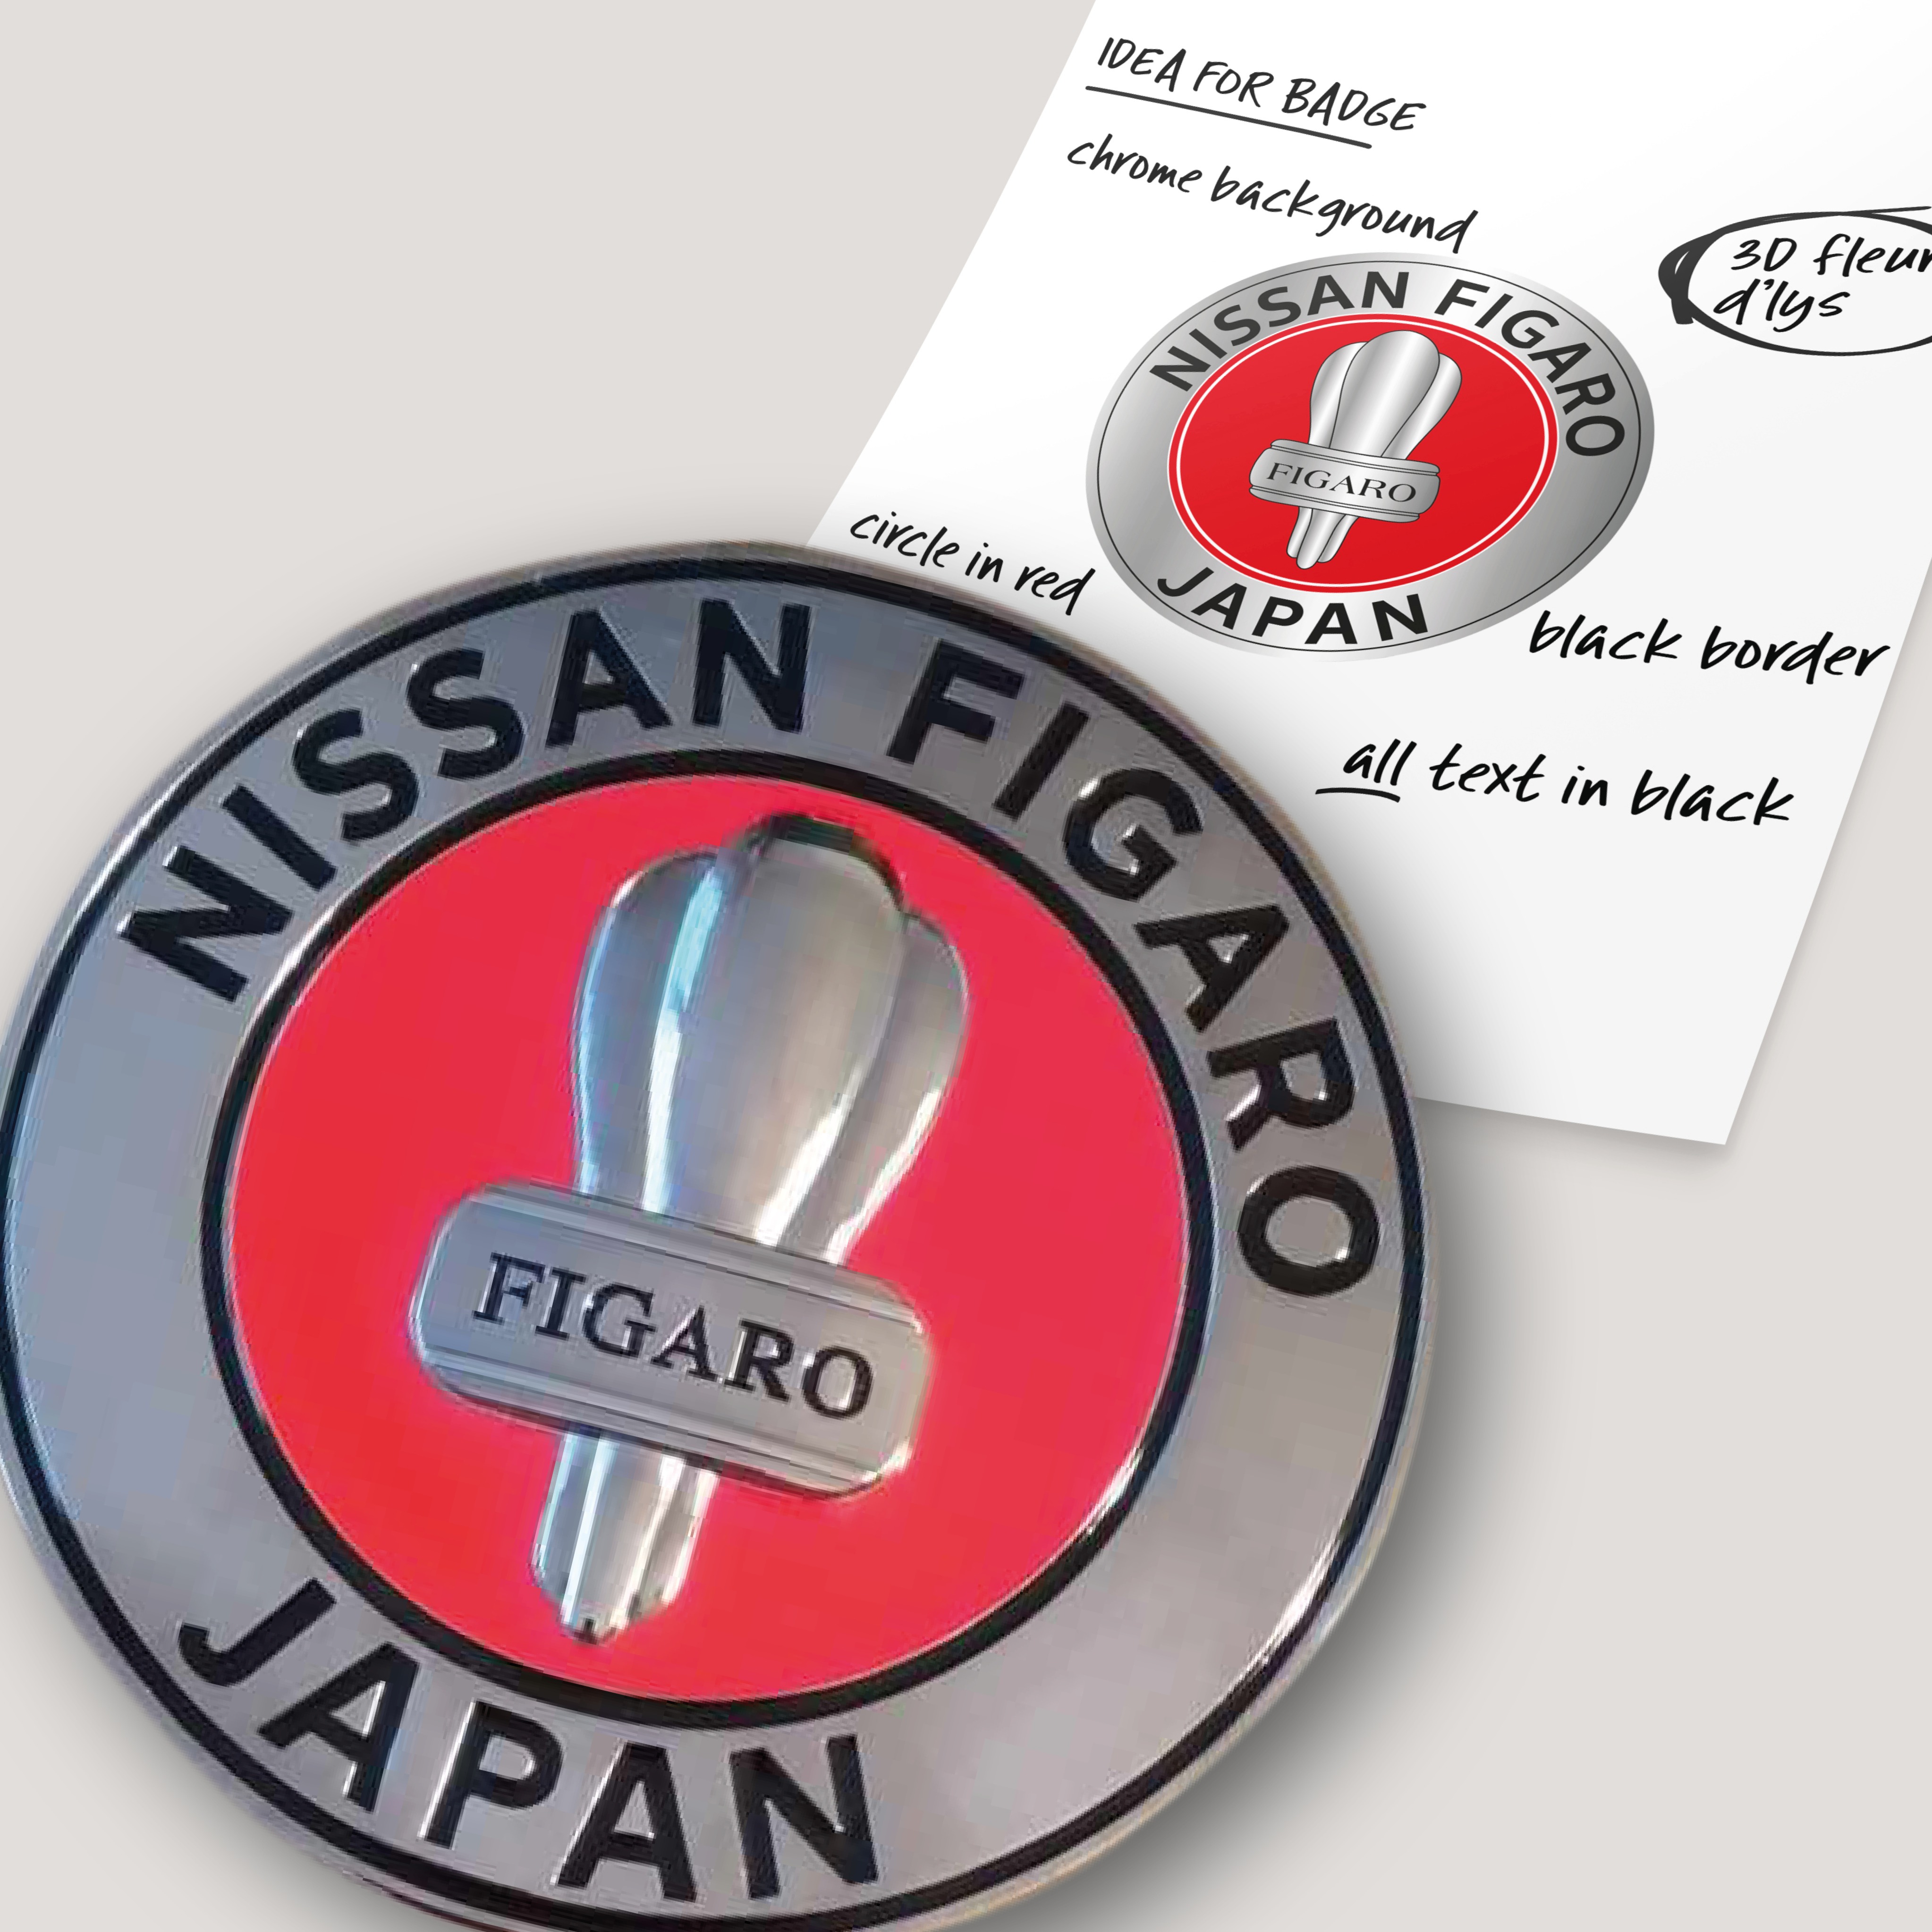 Pre-production sample - Nissan Figaro car grille badge